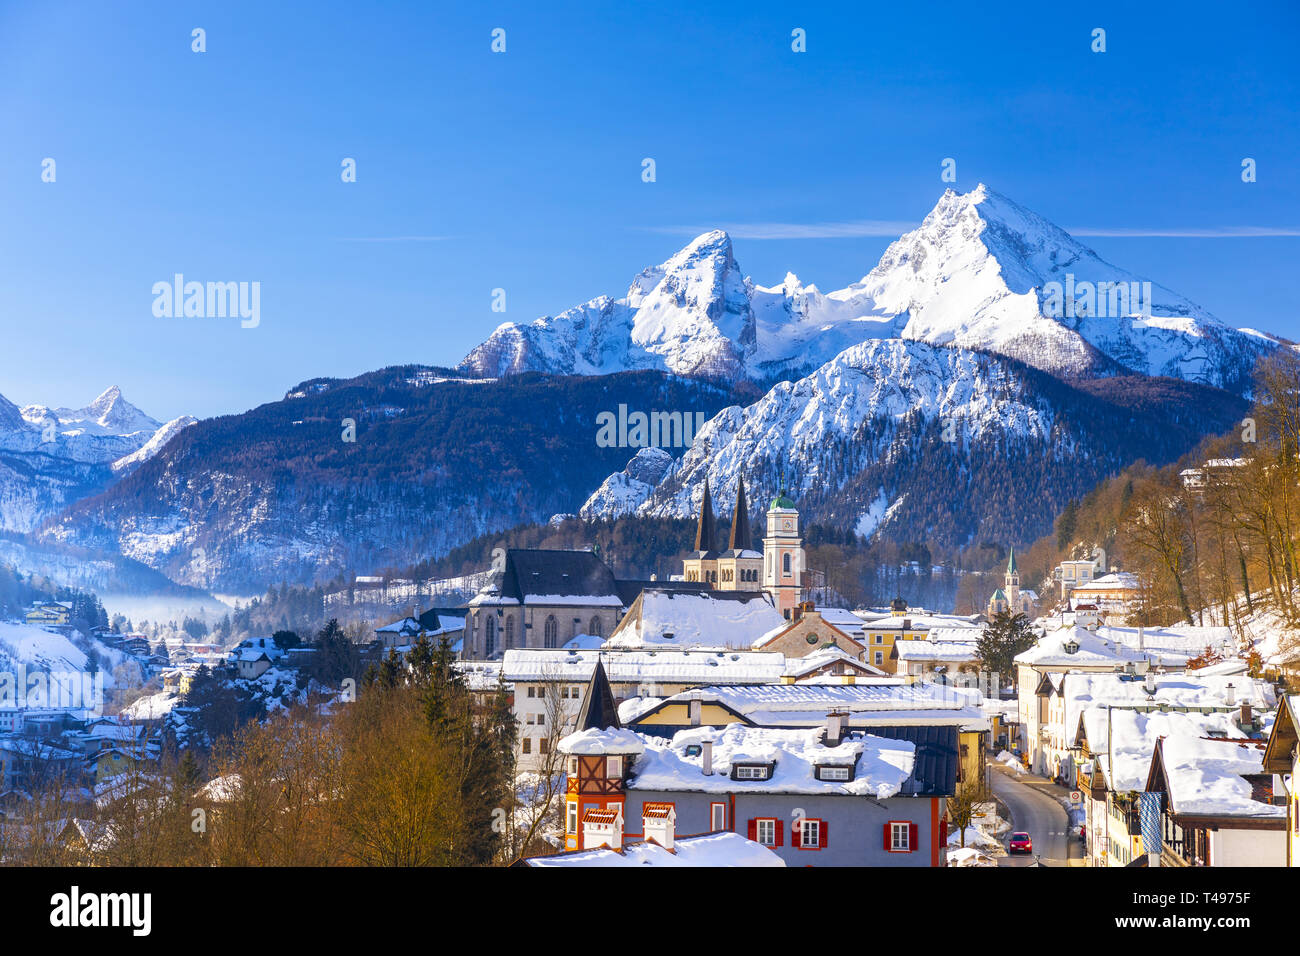 Historic town of Berchtesgaden with famous Watzmann mountain in the background, National park Berchtesgadener, Upper Bavaria, Germany Stock Photo